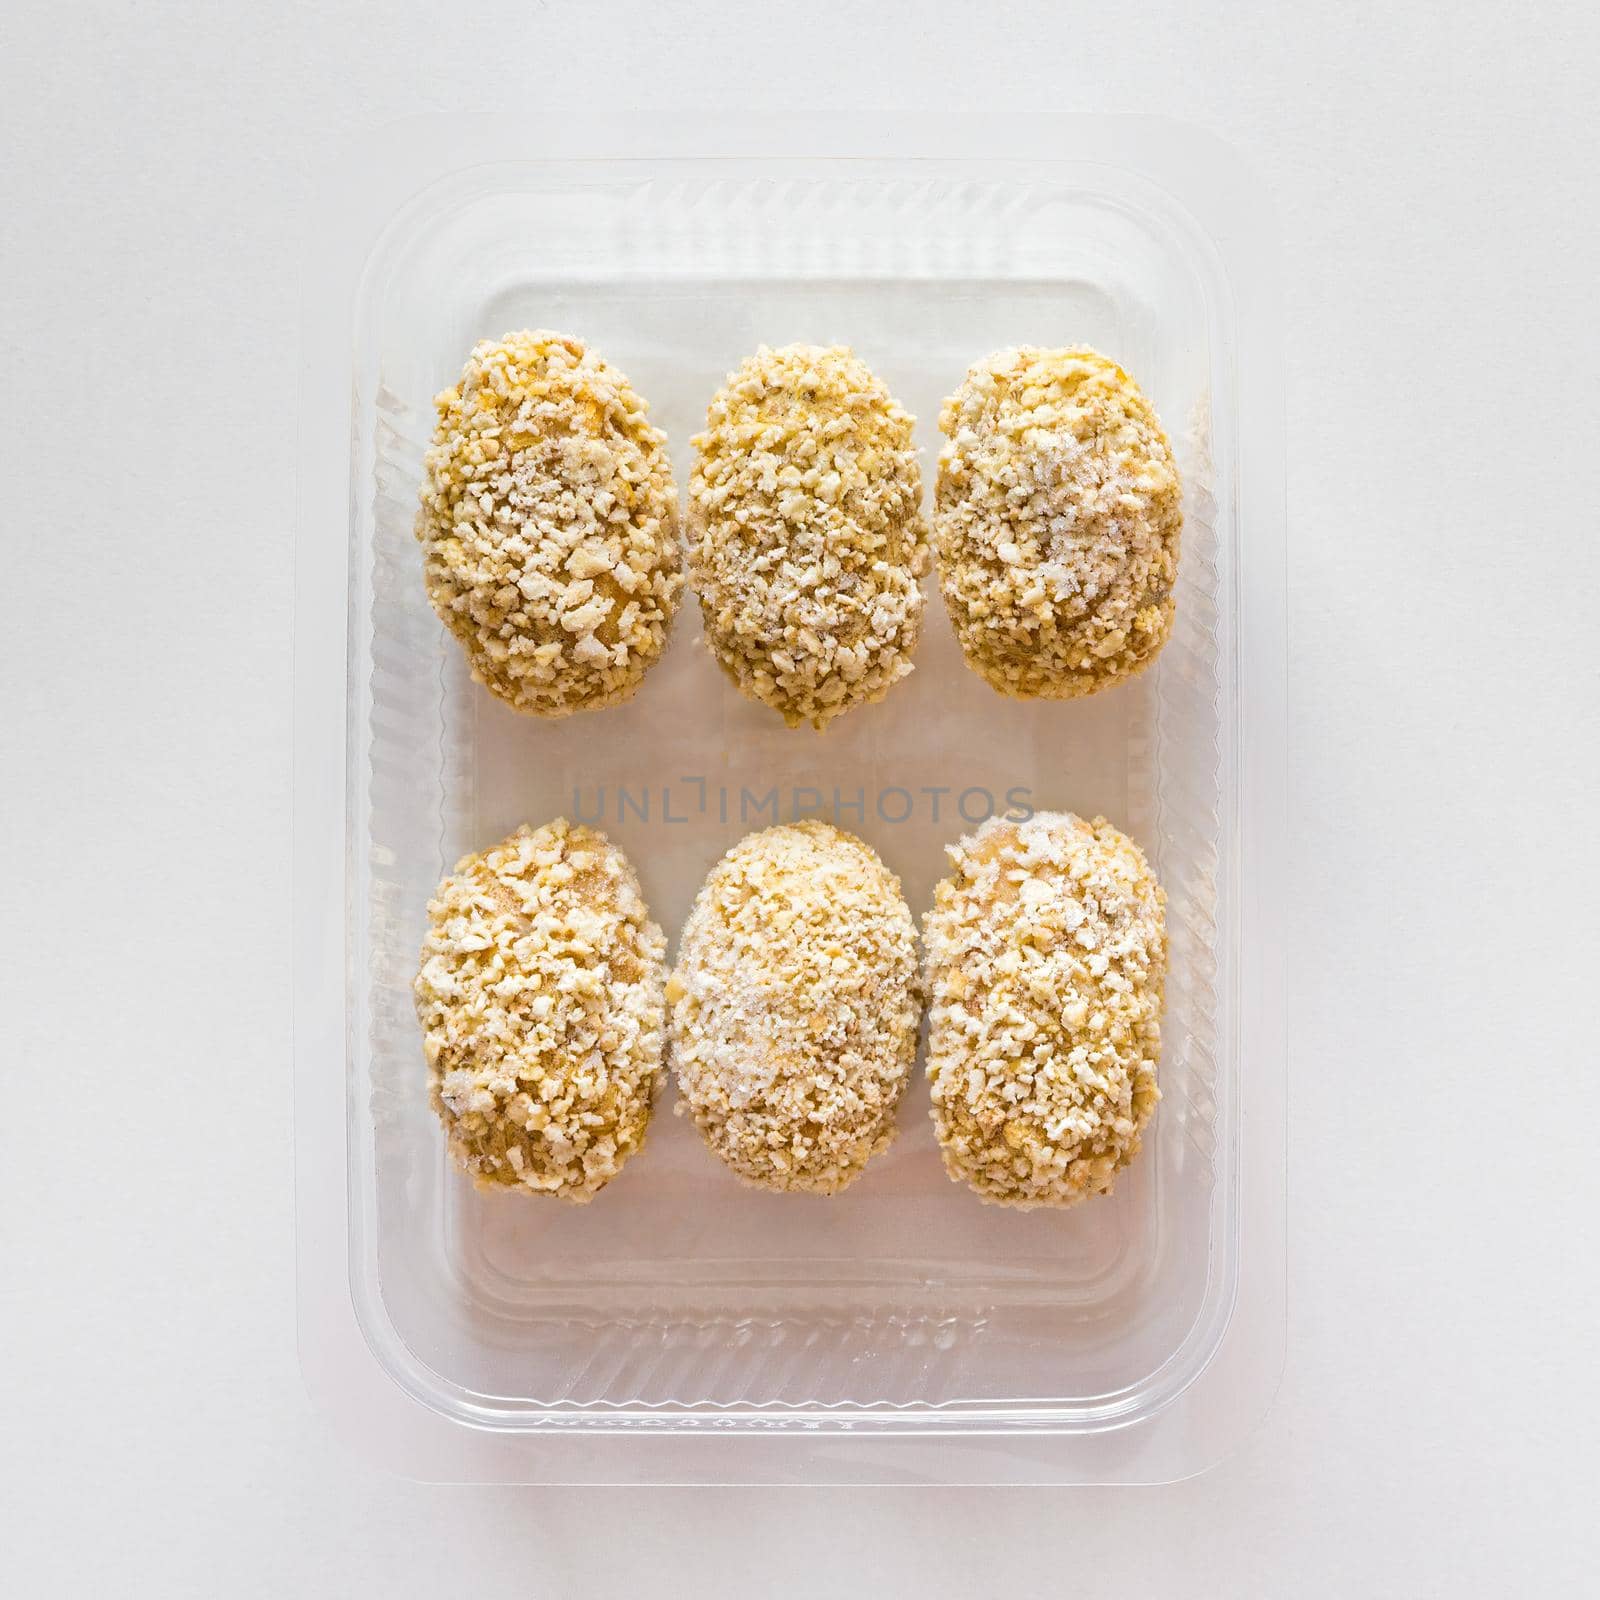 Frozen breaded croquettes in transparent tray. Mediterranean and spanish cuisine. Preserved food for sale. Top view.